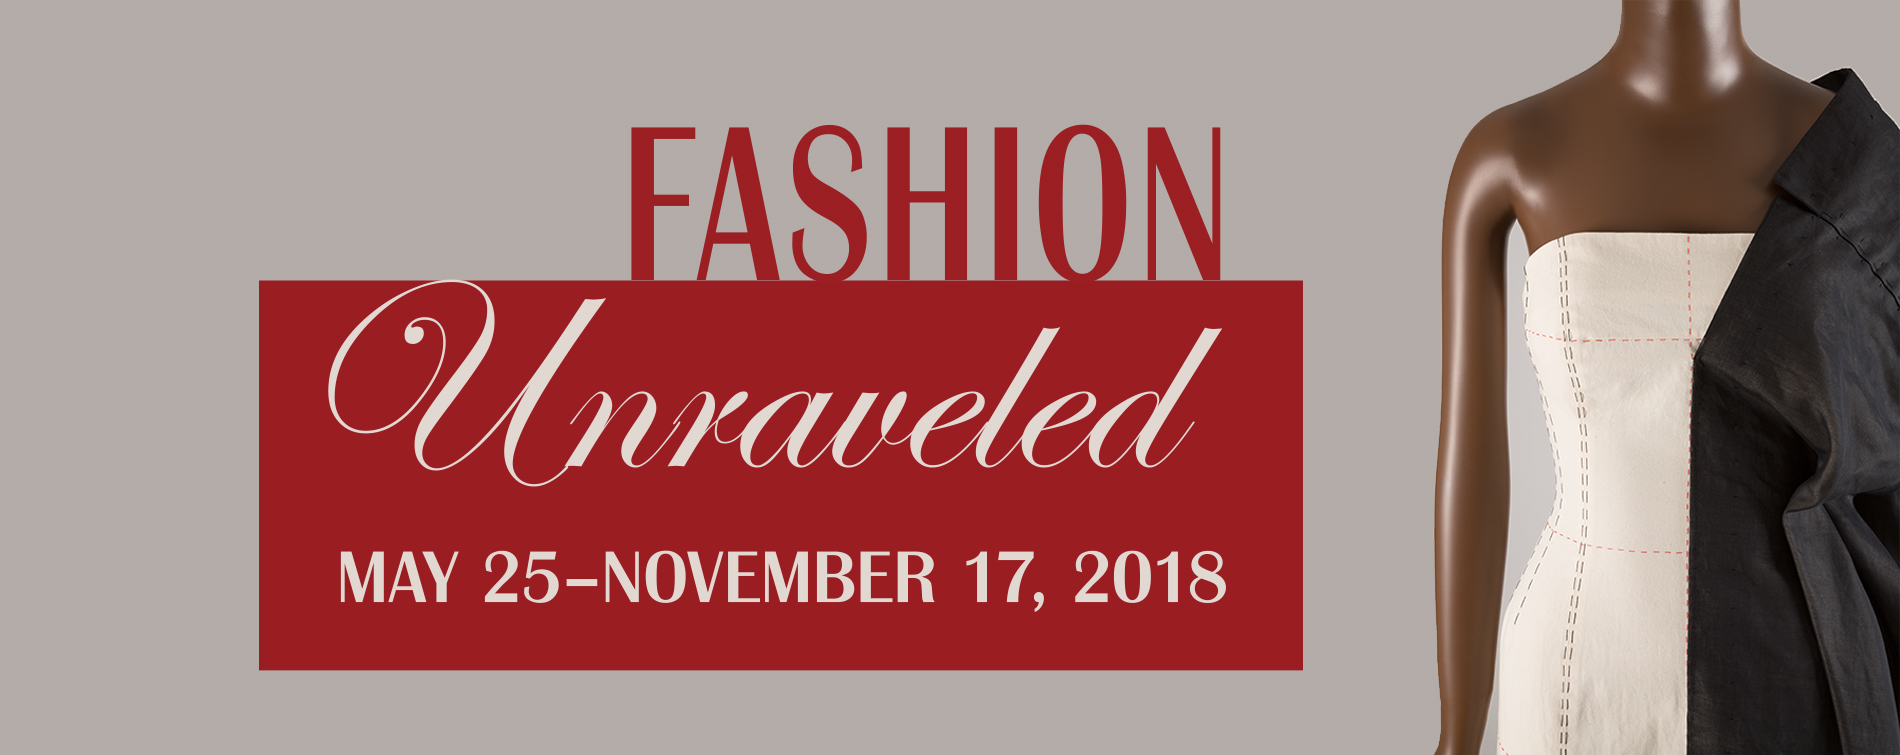 banner with text that reads: Fashion Unraveled May 25-November 17, 2018